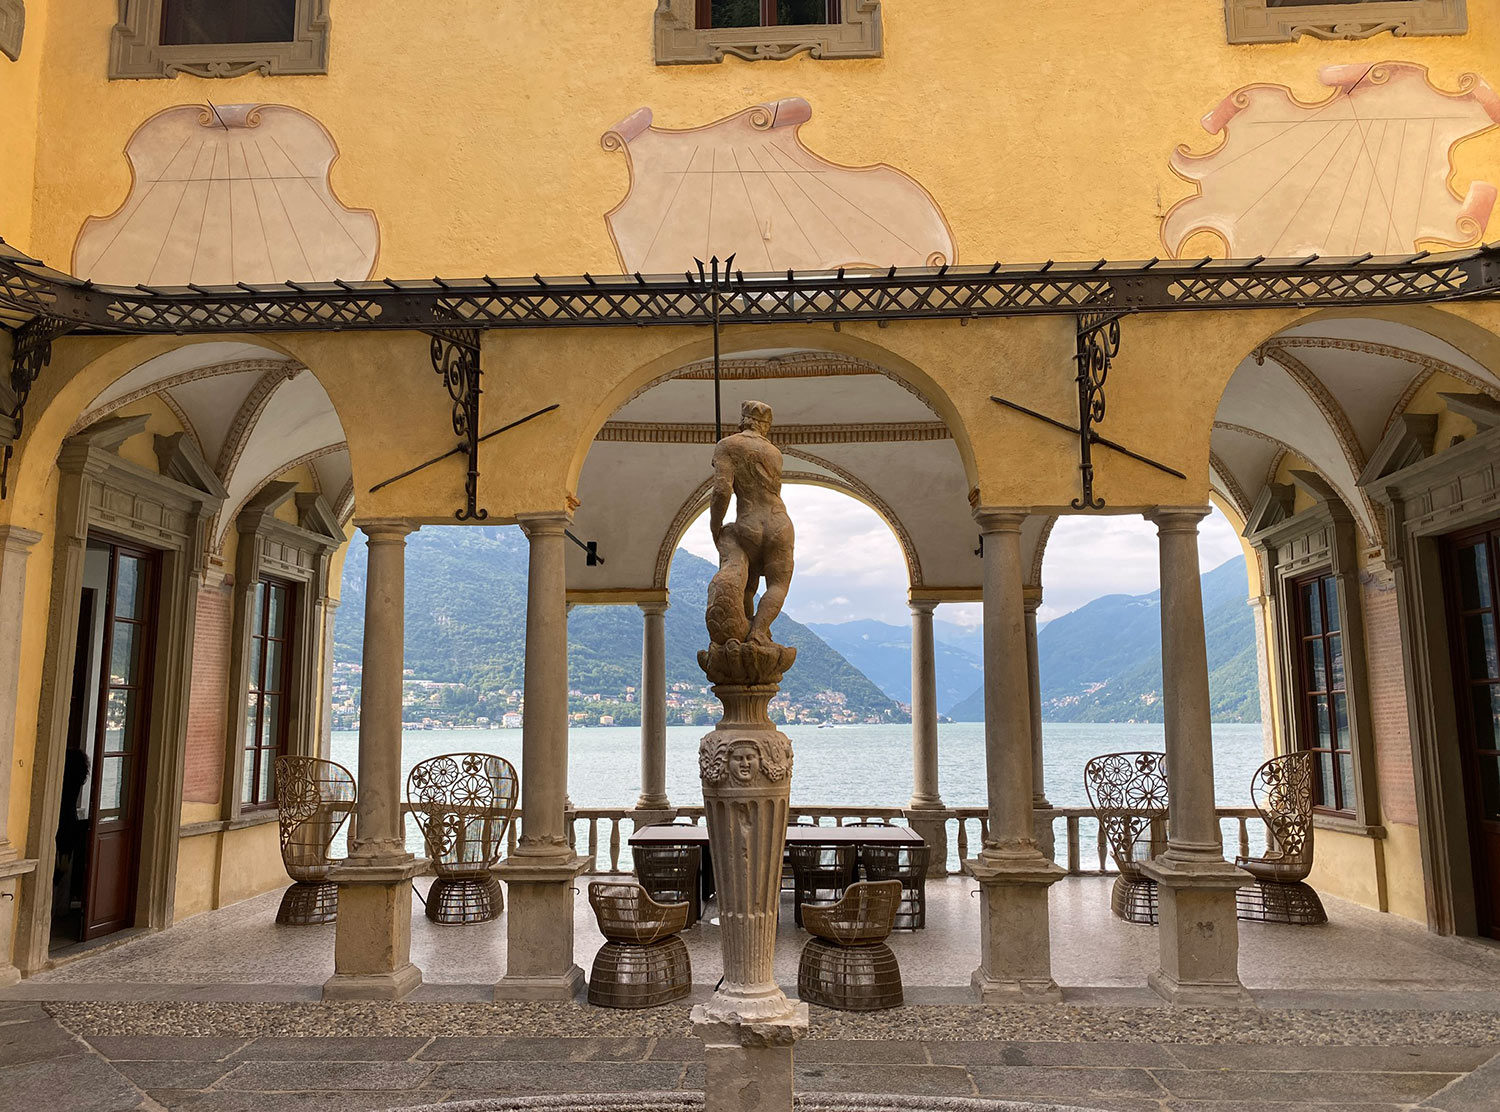 Il Sereno Villa Pliniana, set in an 18 acre waterfront private estate, is the oldest property on the lake. Imagine the parties these walls have seen!